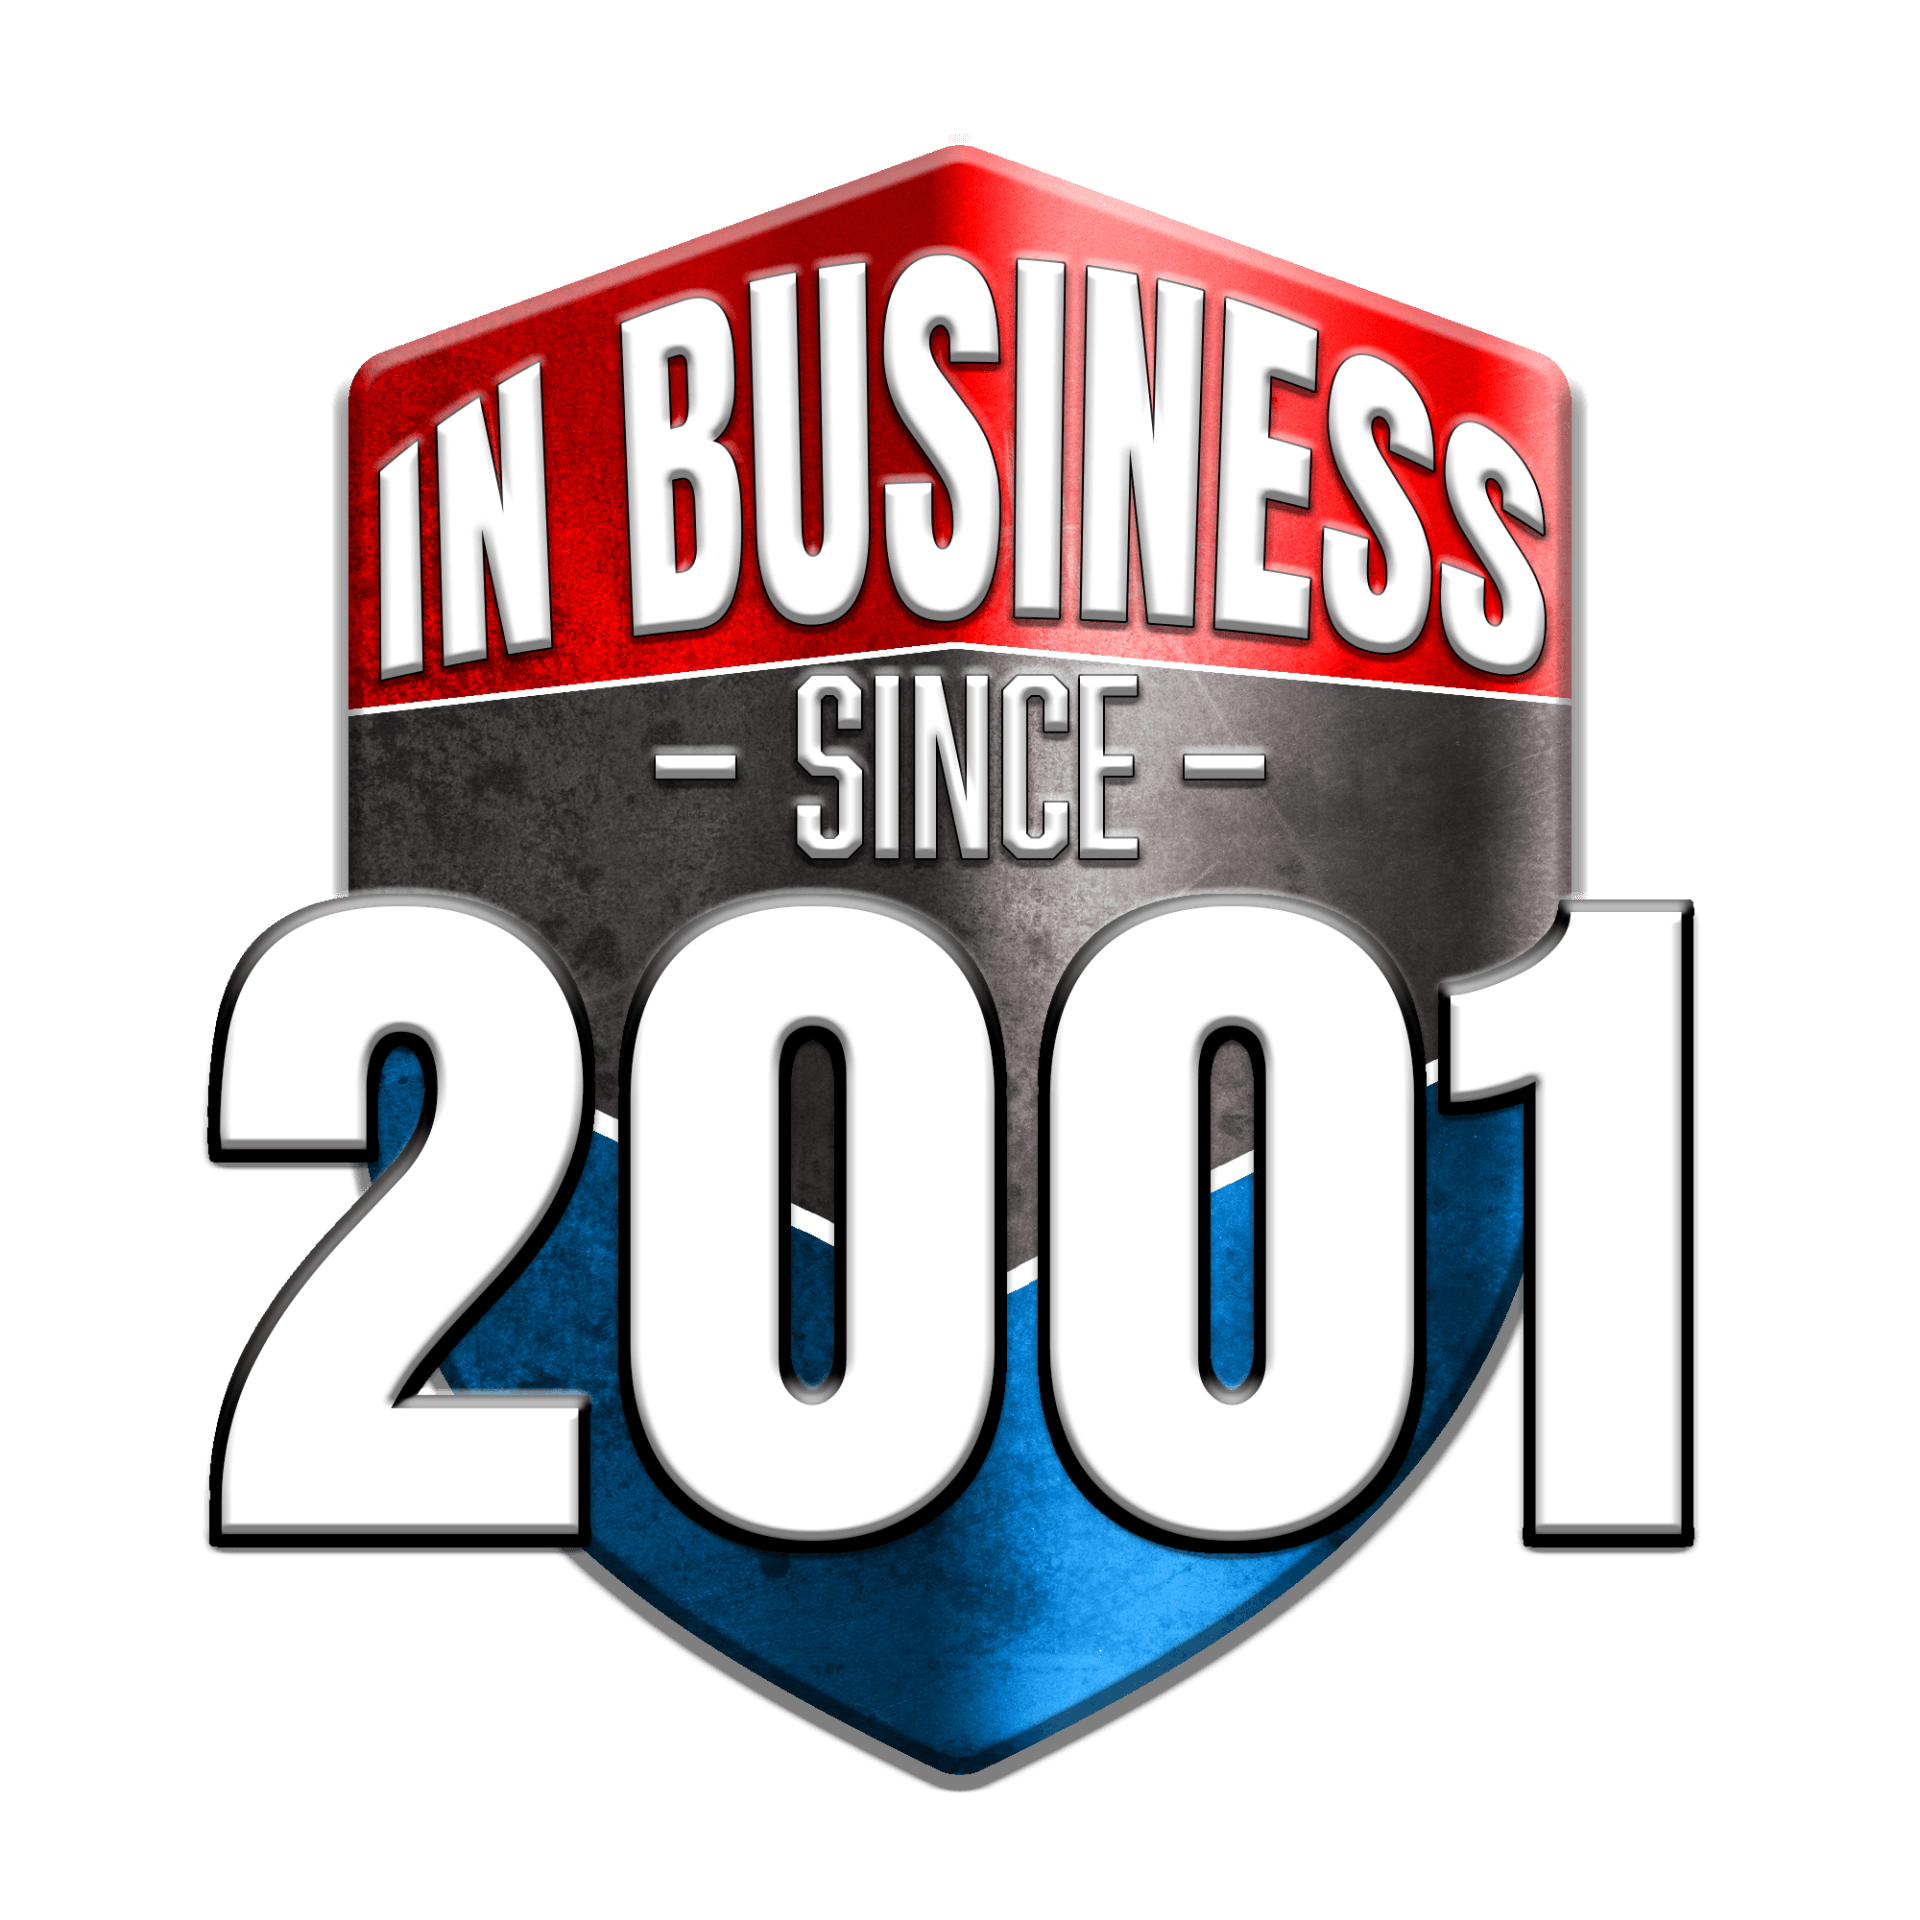 in the window business since 2001